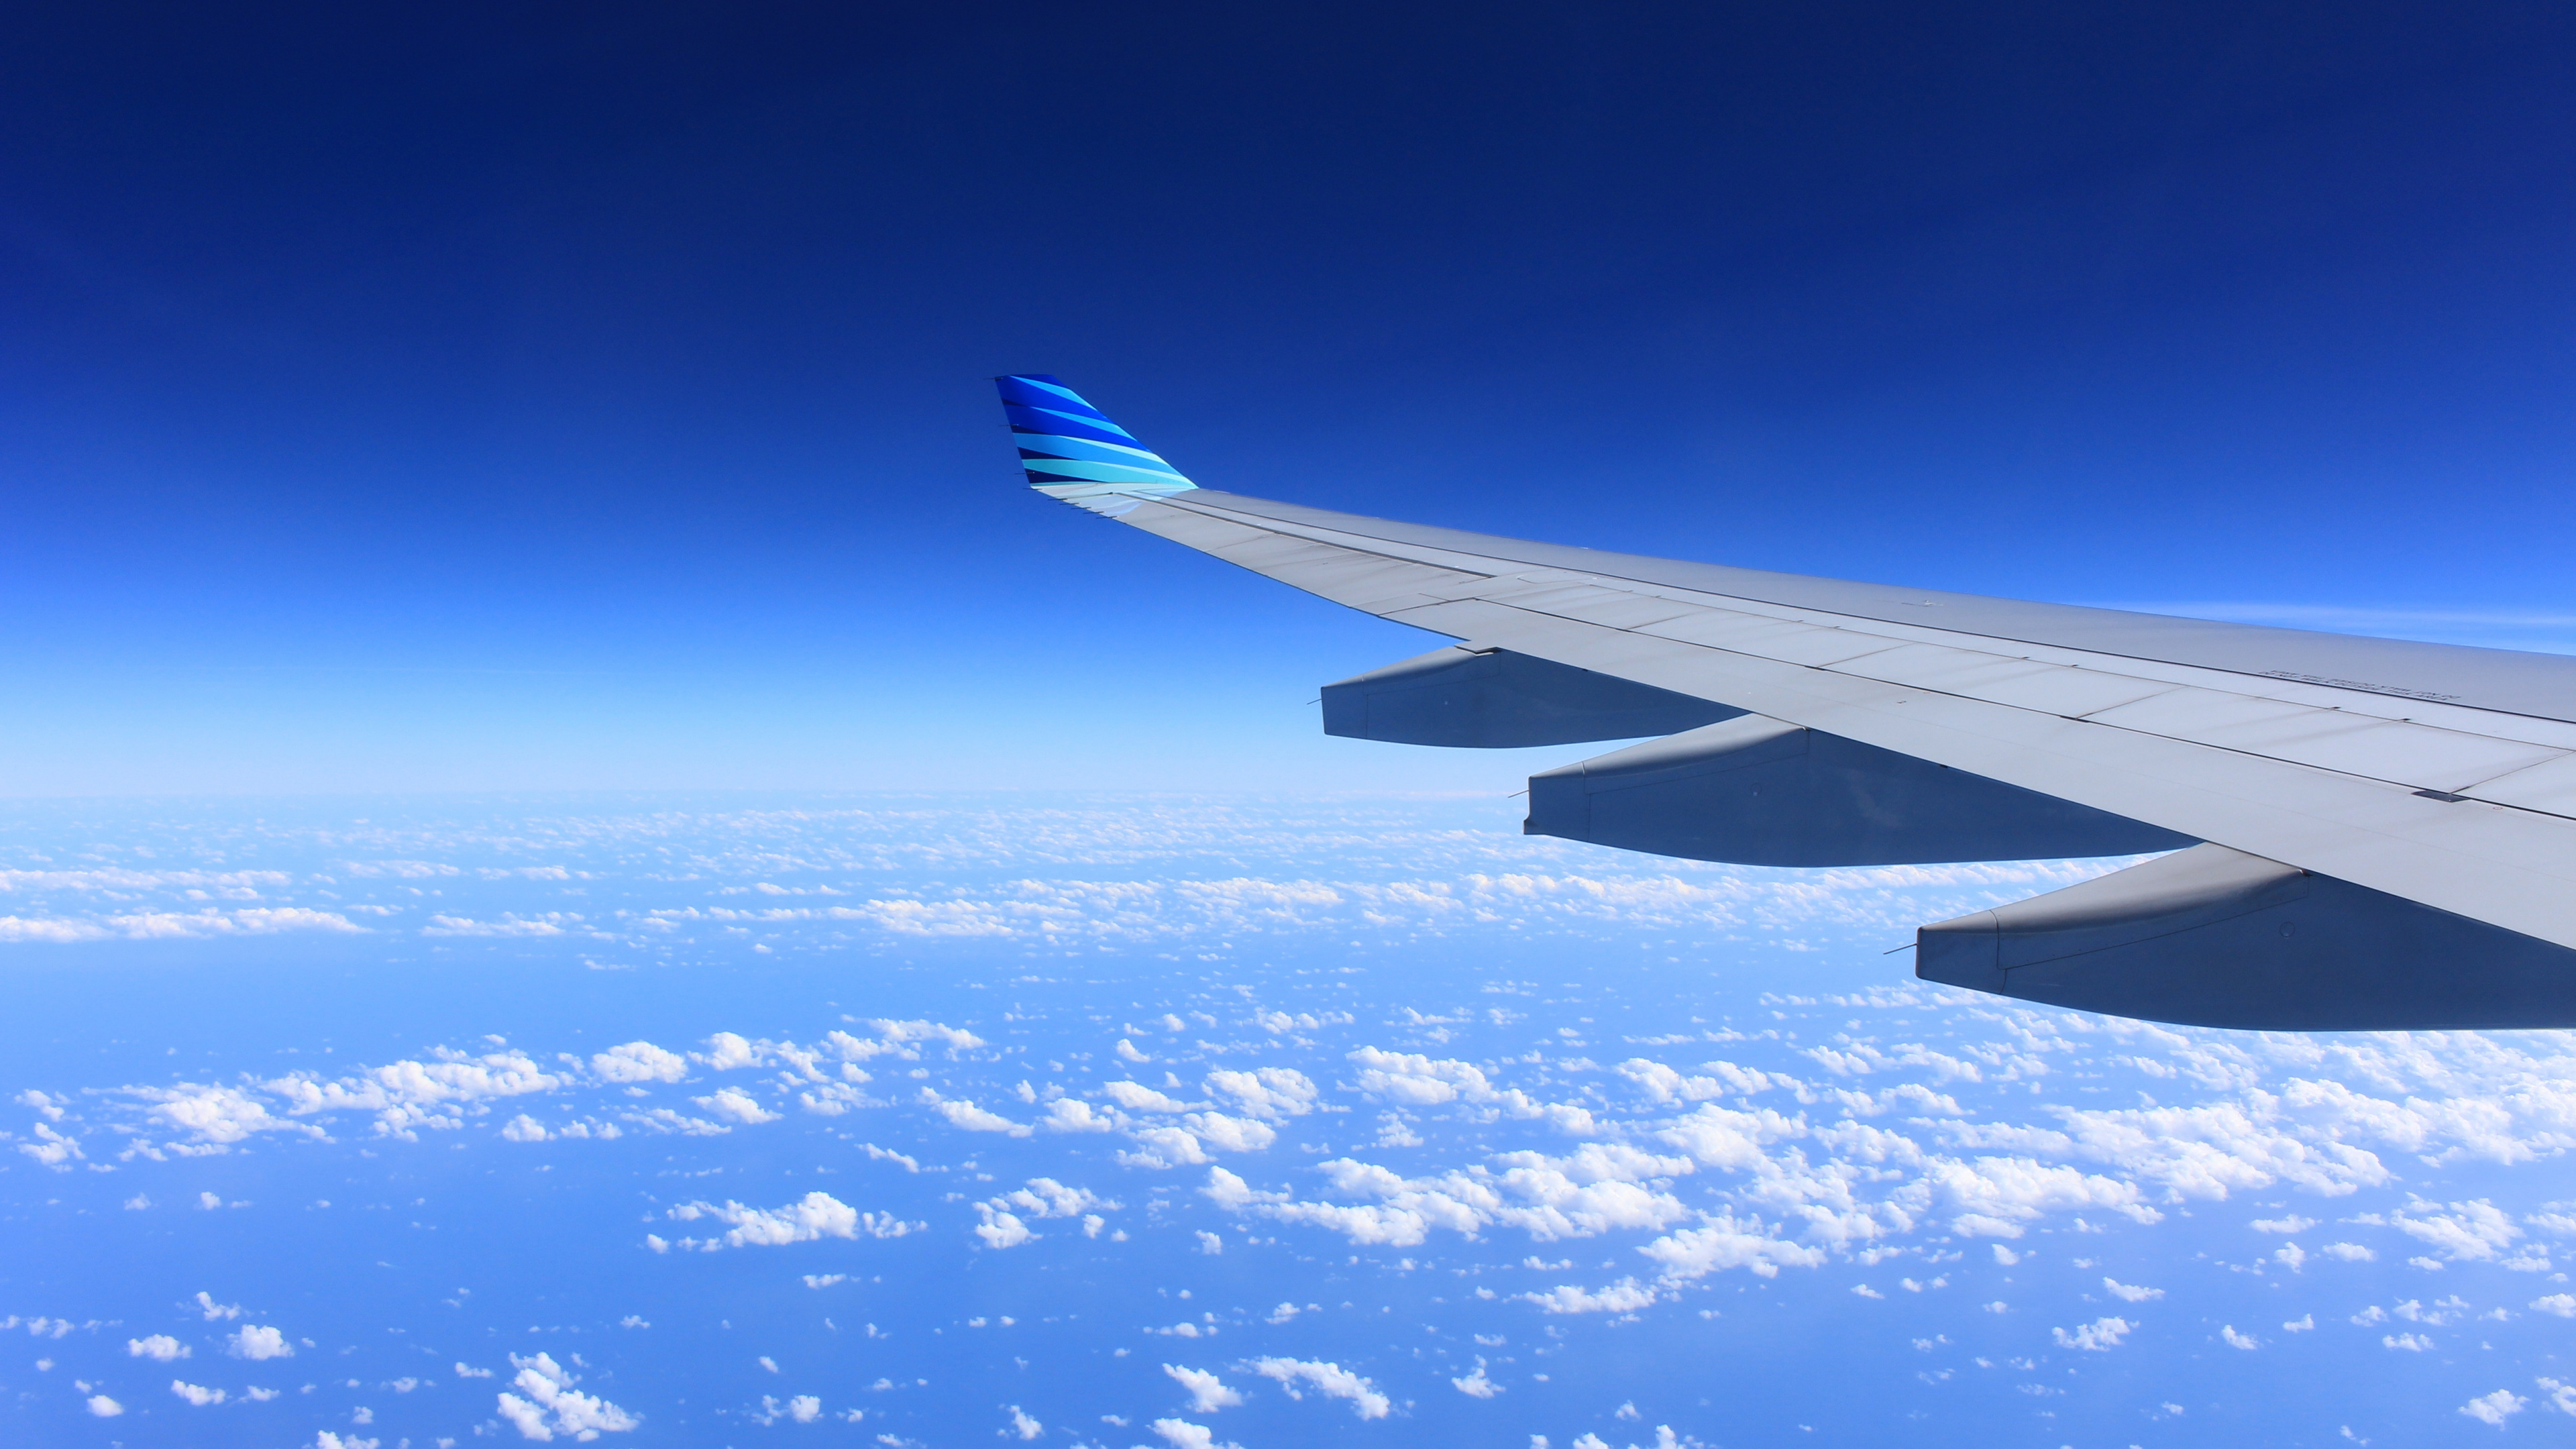 White and Blue Airplane Wing Under Blue Sky During Daytime. Wallpaper in 3840x2160 Resolution